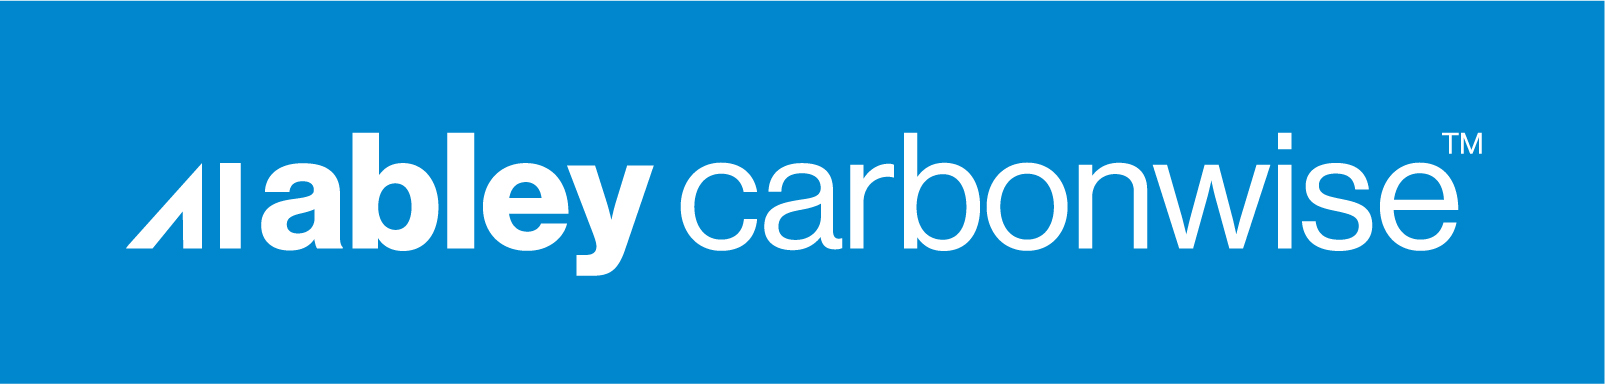 Abley CarbonWise